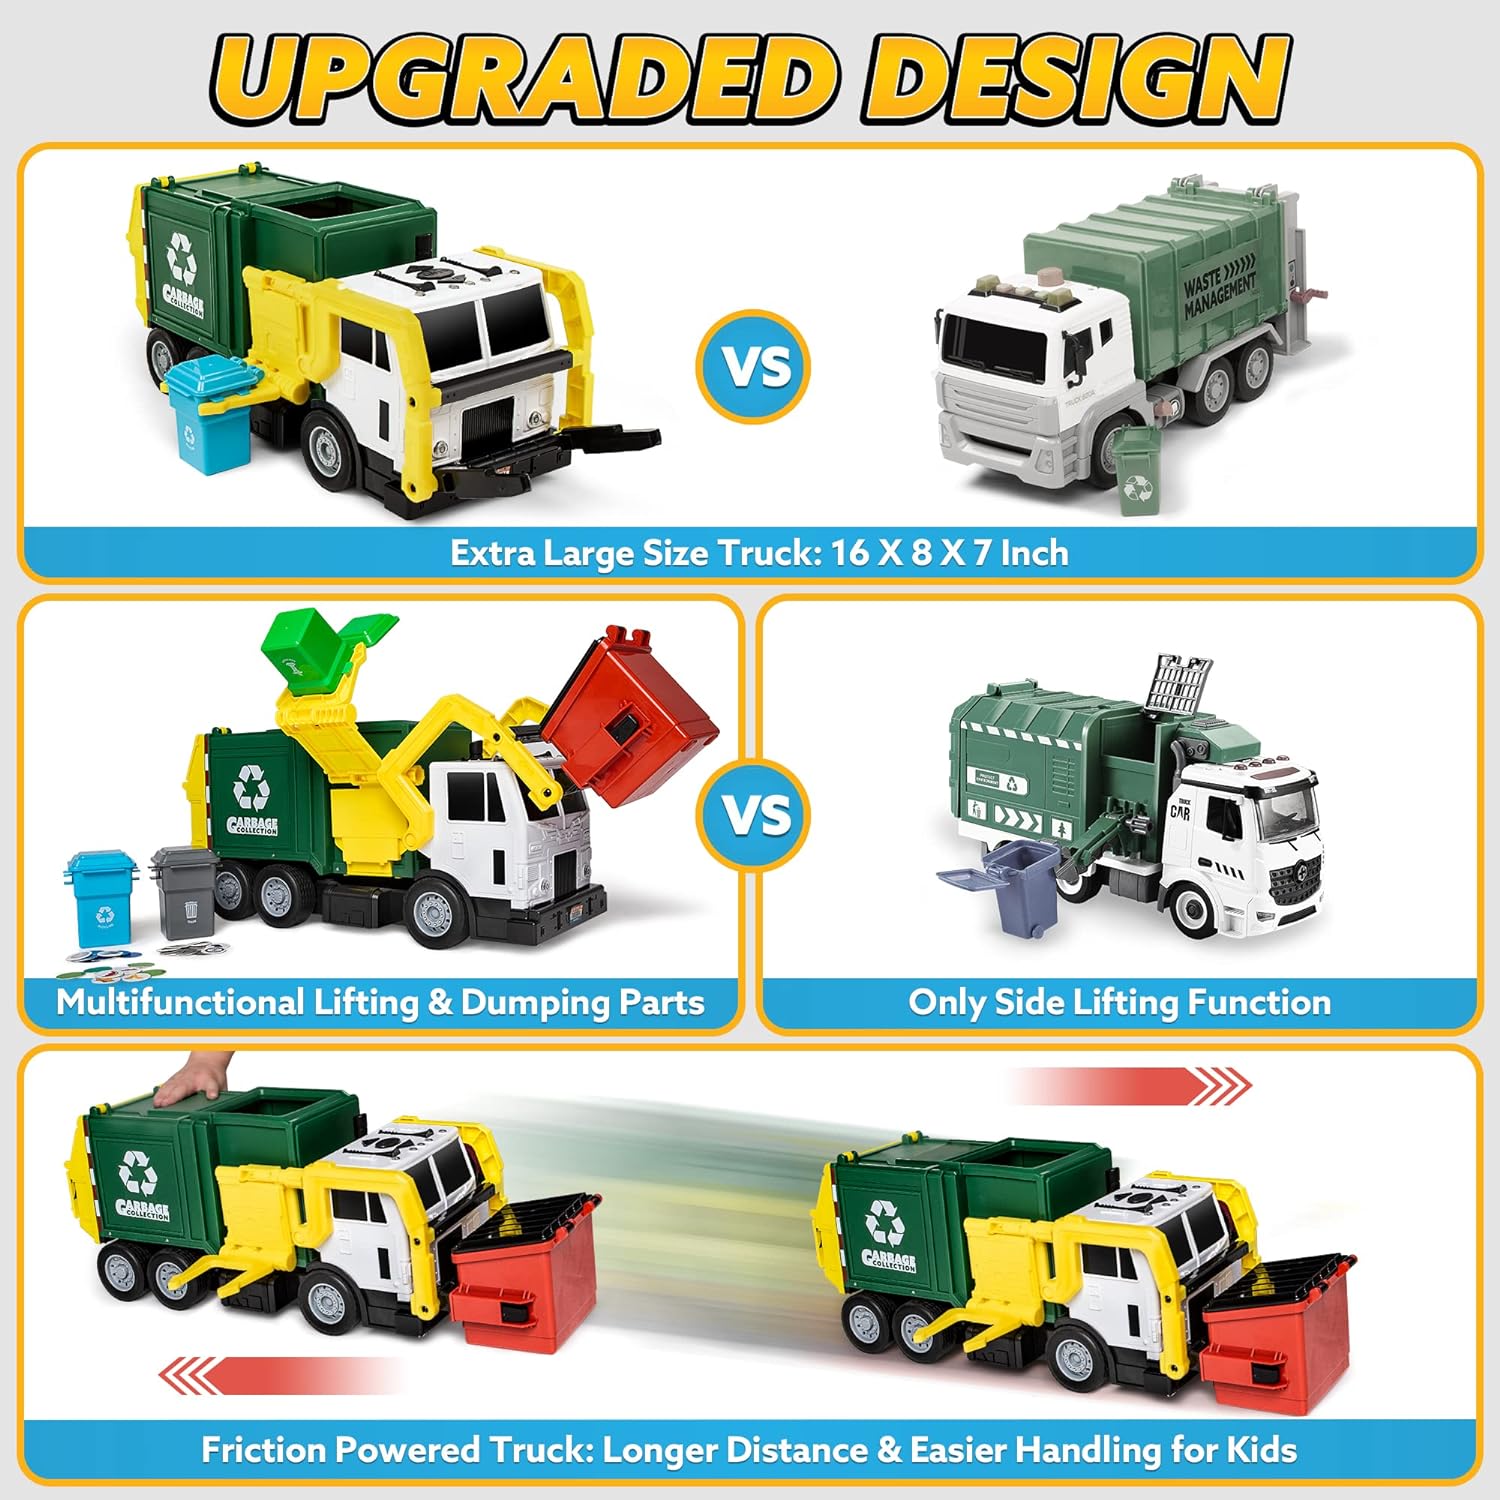 JOYIN 16 Large Garbage Truck Toys for Boys, Realistic Trash Truck Toy with Trash Can Lifter and Dumping Function, Garbage Sorting Cards for Preschoolers, Toy Truck Gift for Boy Age 2 3 4 5 Years Old : Toys  Games